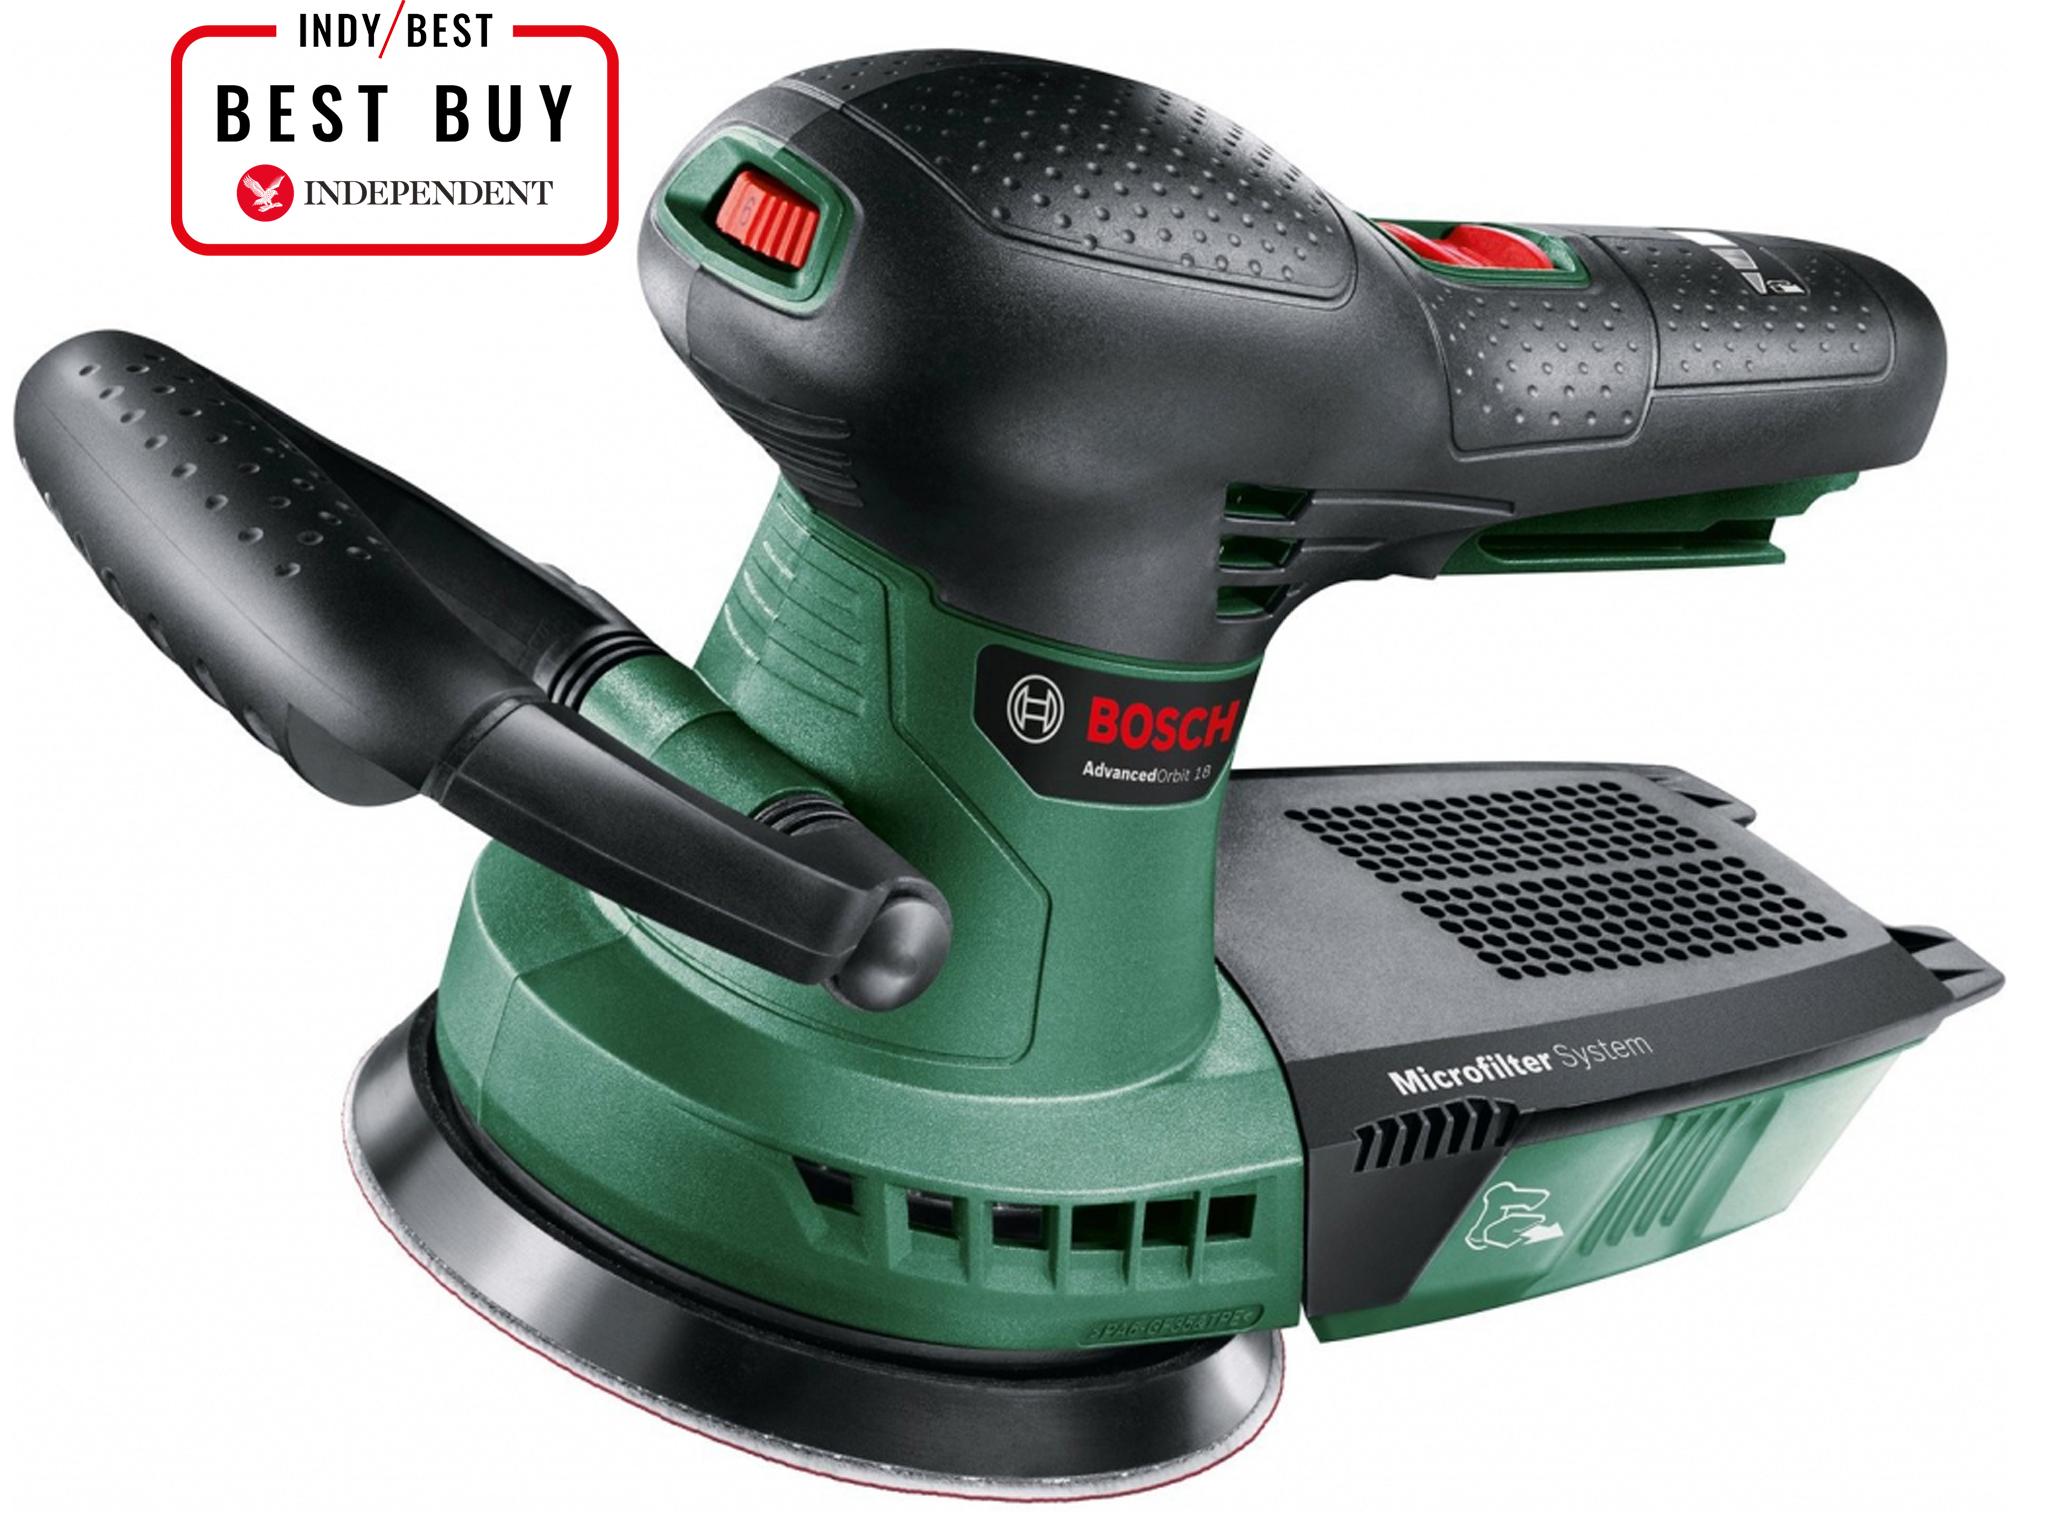 8 Best Cordless Sanders The Independent